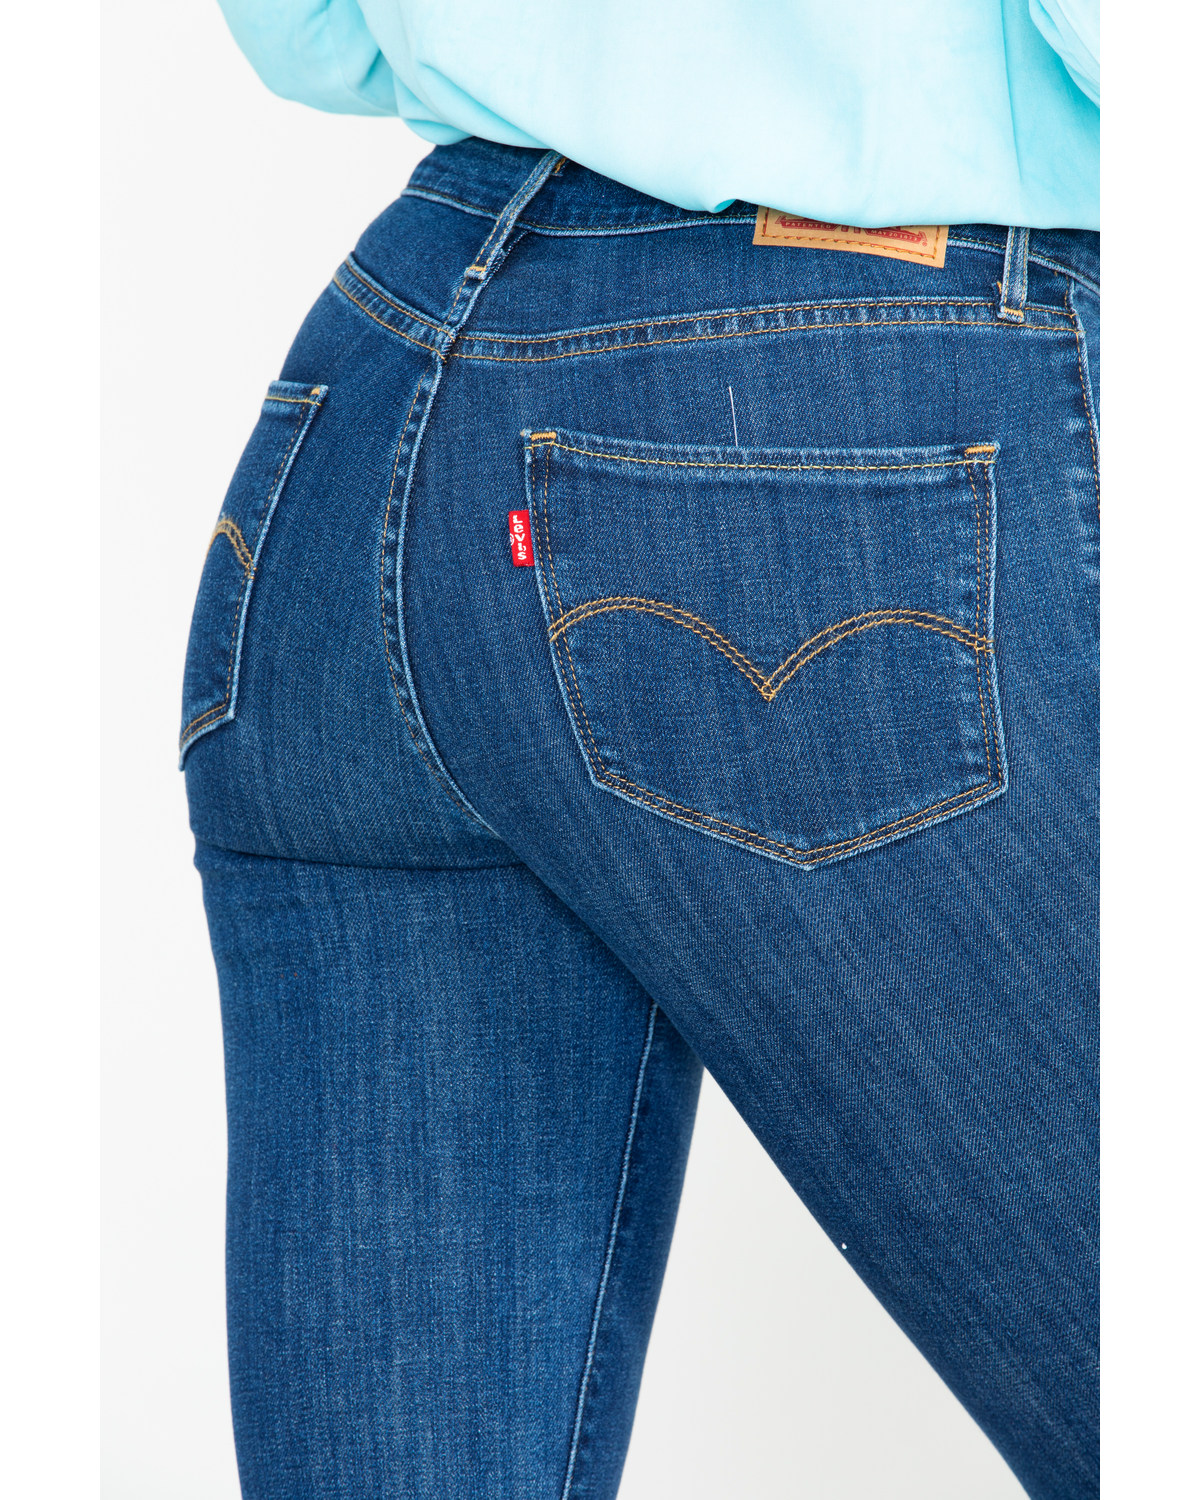 Levi’s Women's 721 High-Waisted Skinny Jeans | Boot Barn